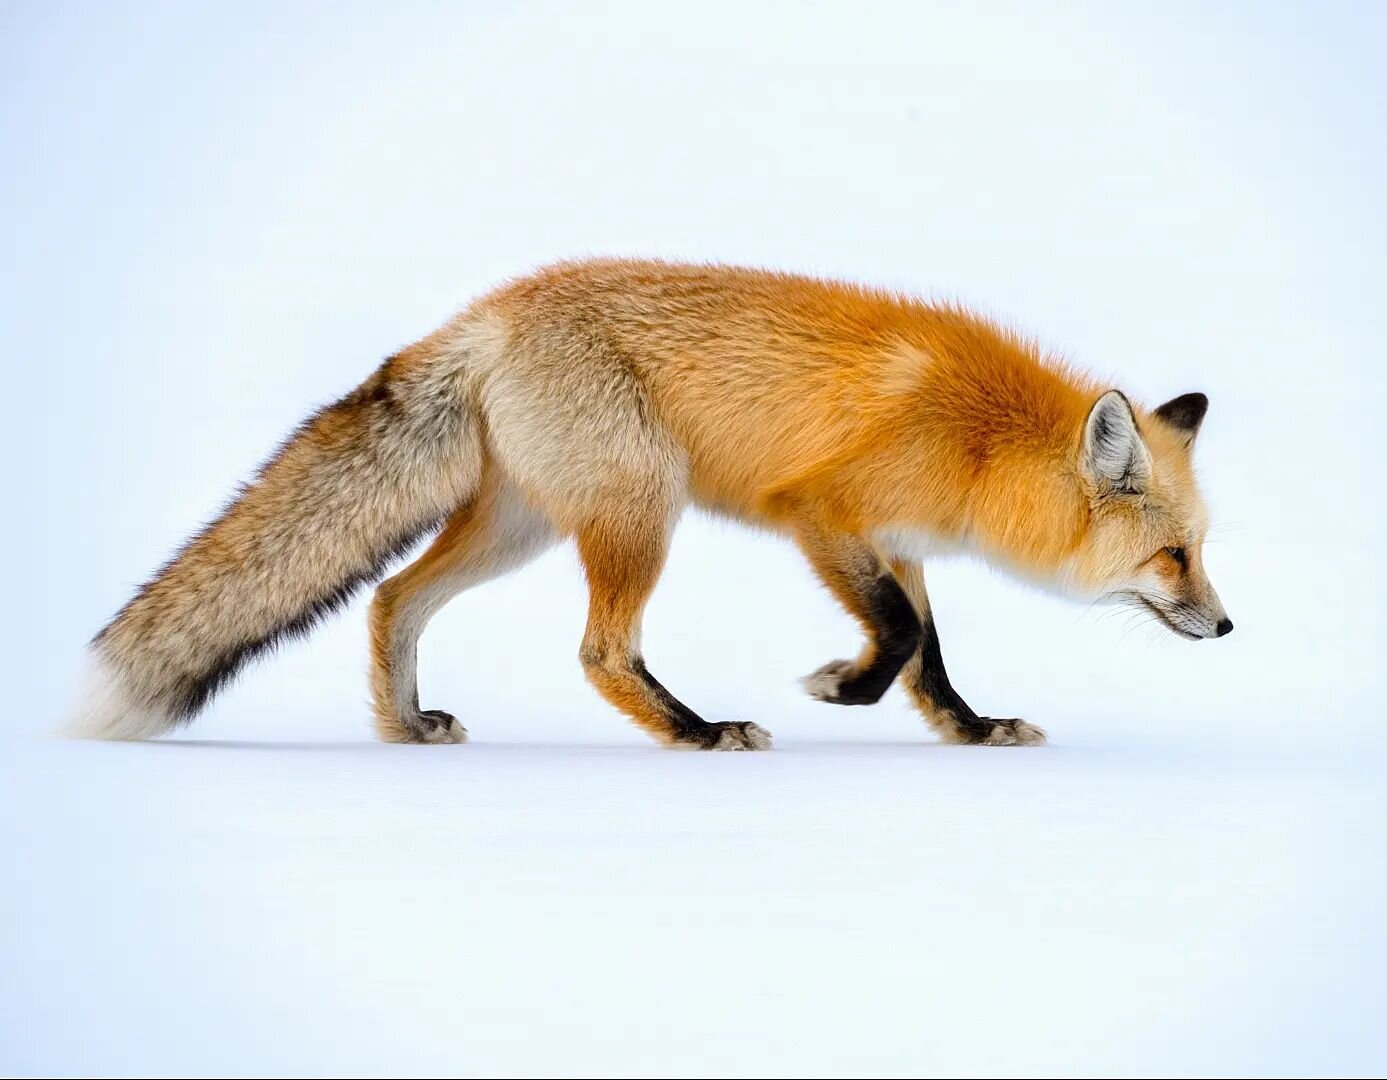 A red fox travels light on top of deep snow listening for small rodents below. These animals have extremely sensitive ears and can pick up the rustle of small feet as voles and mice dig tunnels through the snow. 

#Runningwildmedia #yellowstone #wild